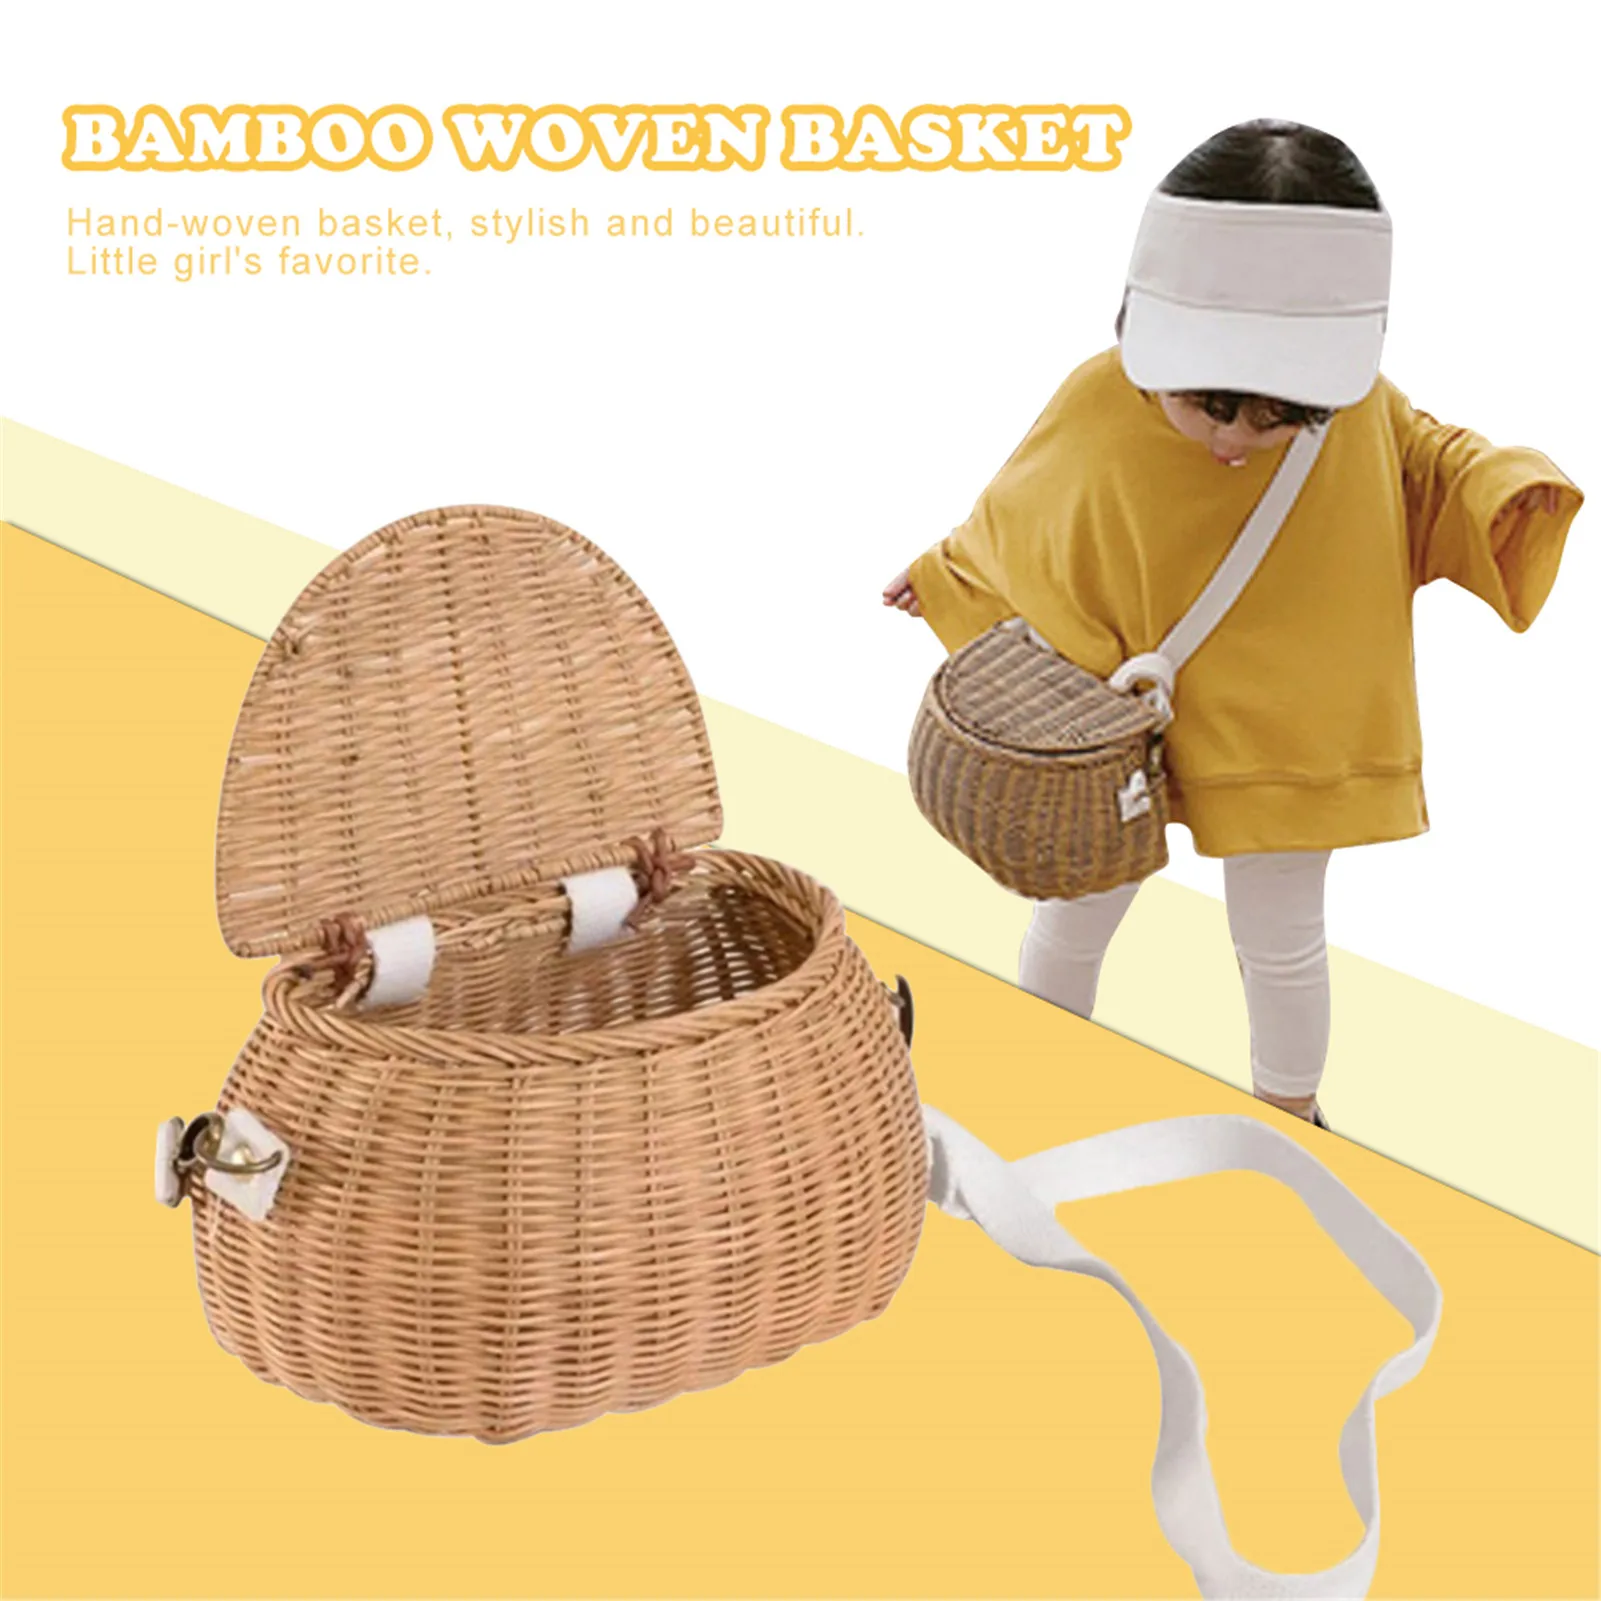 

Bicycle Basket Kids Bike Scooter Tricycle Supplies Artificial Weaving Wicker Small Back Basket Handmade Rattan Toy Children Bags